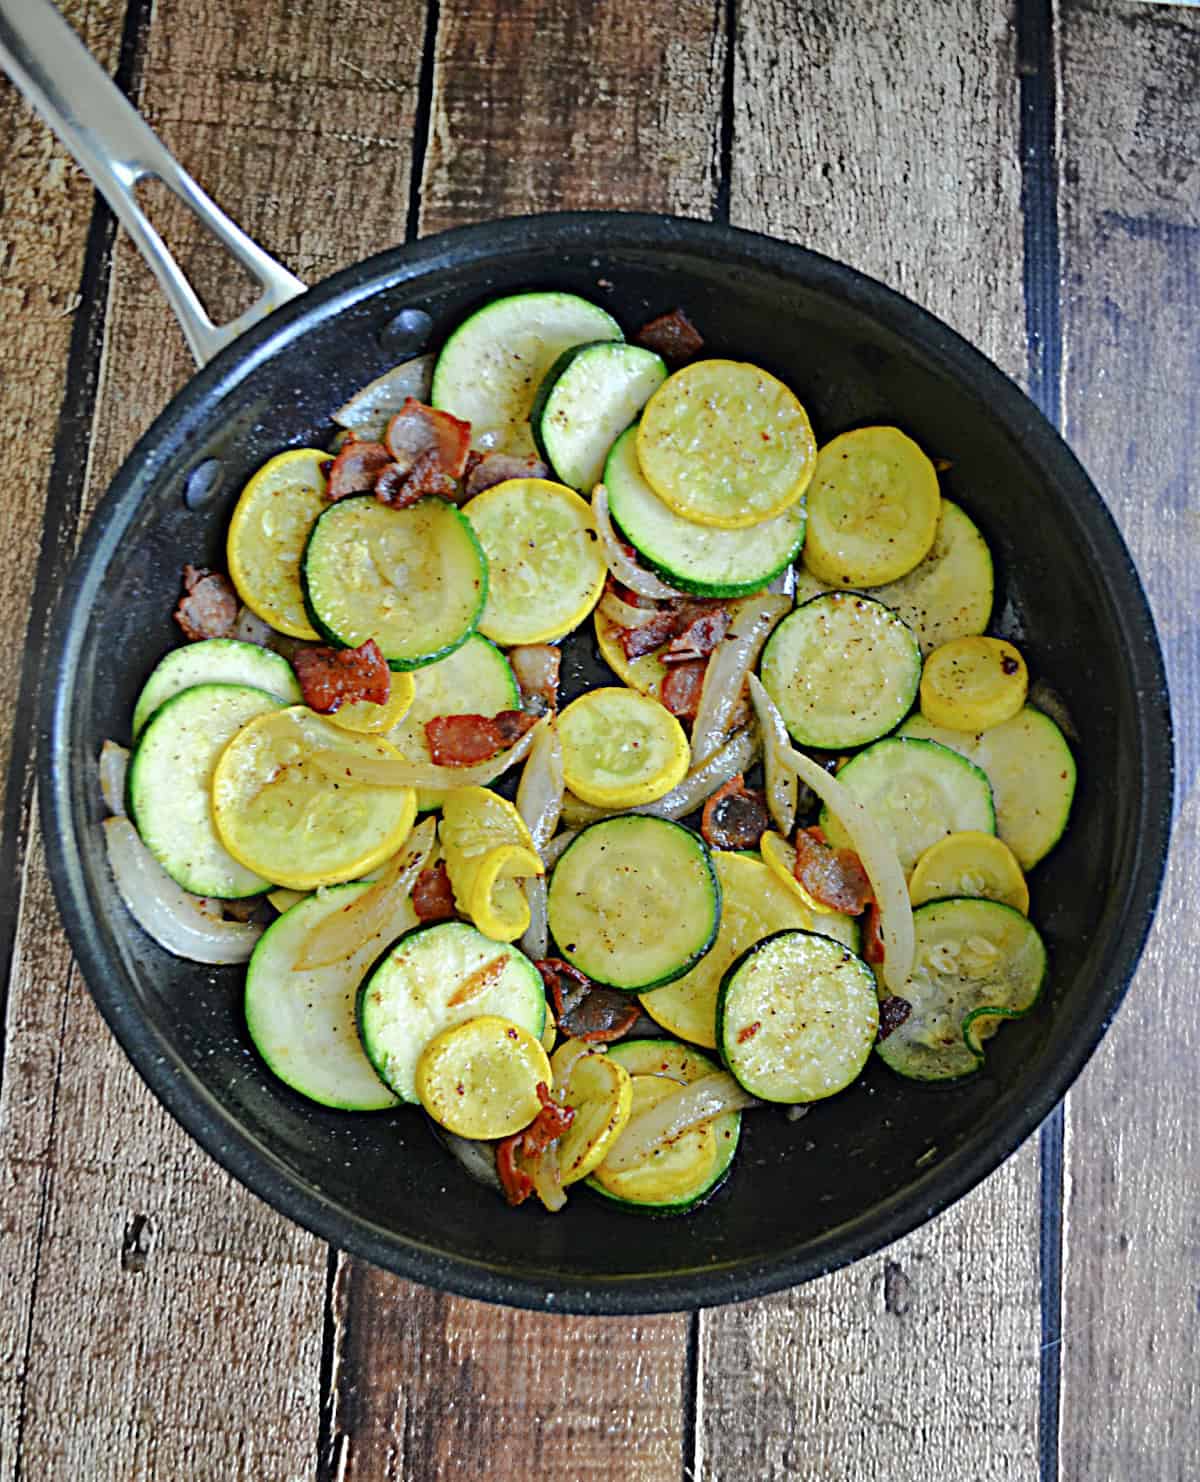 Sauteed Zucchini and Squash with Bacon